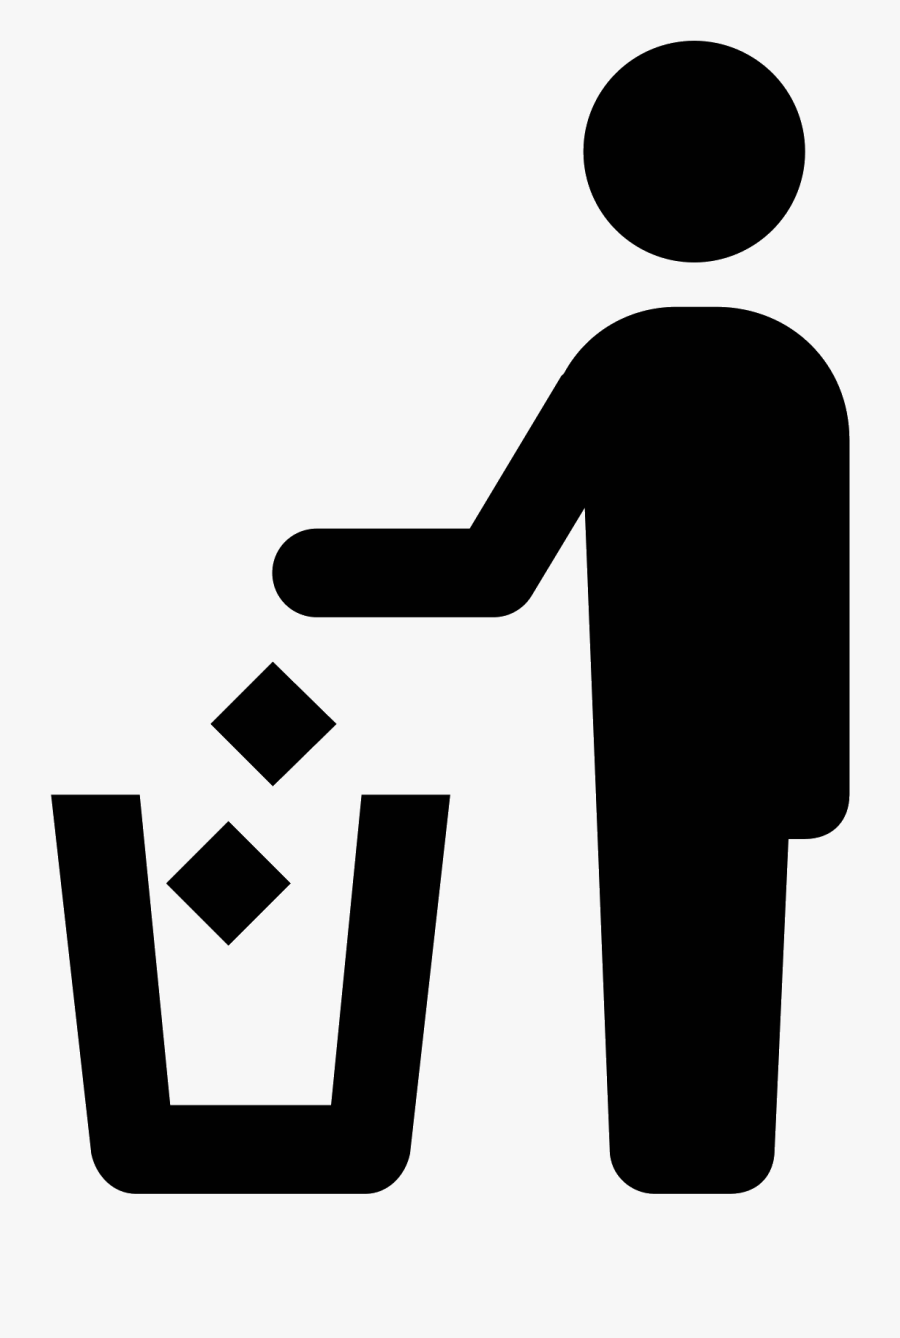 Clip Freeuse Collection Of Free Disposing Clipart Garbage - Throw Away Trash Png, Transparent Clipart